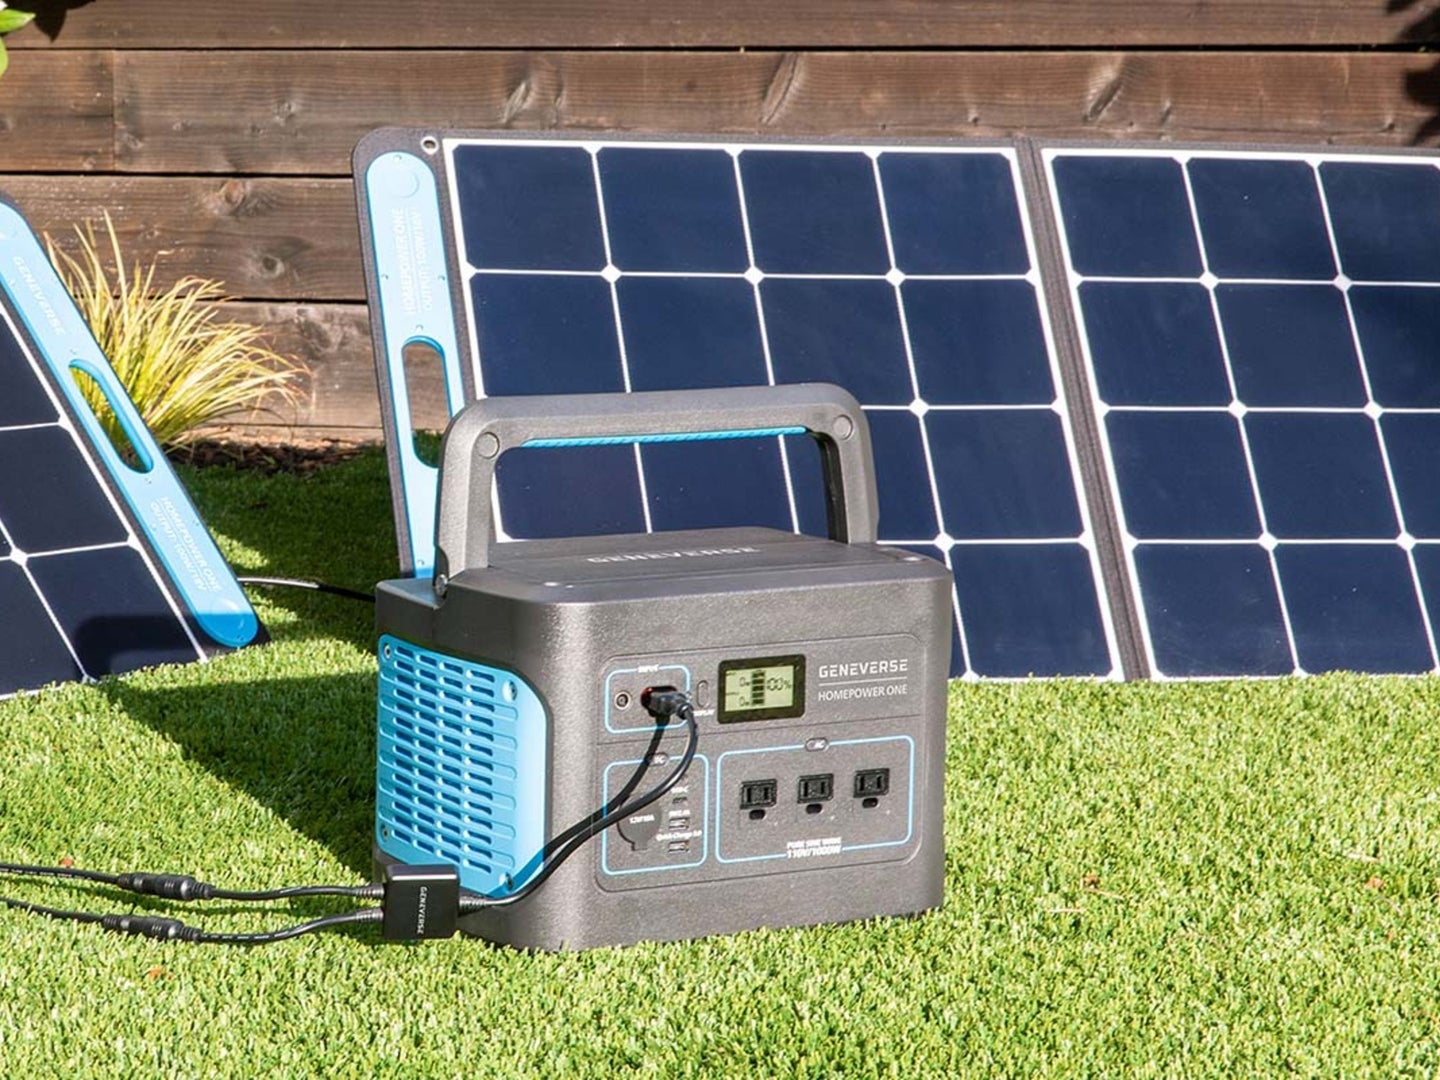 A solar generator and solar panel sit in a backyard